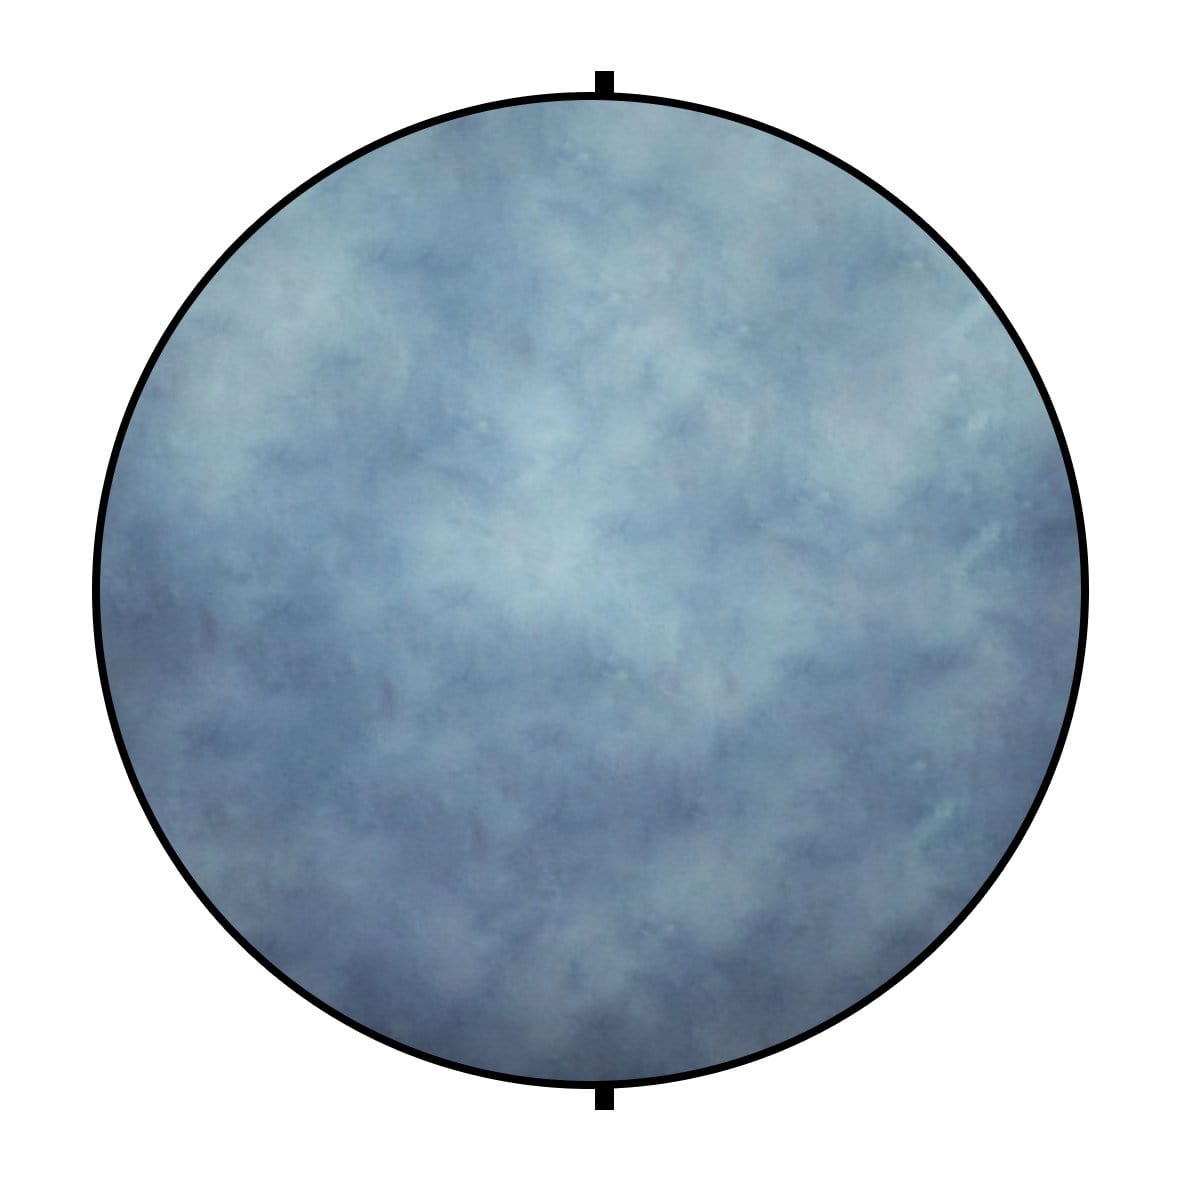 Kate Light Blue/Brown Abstract Texture Mixed Round Collapsible Backdrop for Photography 5X5ft(1.5x1.5m)